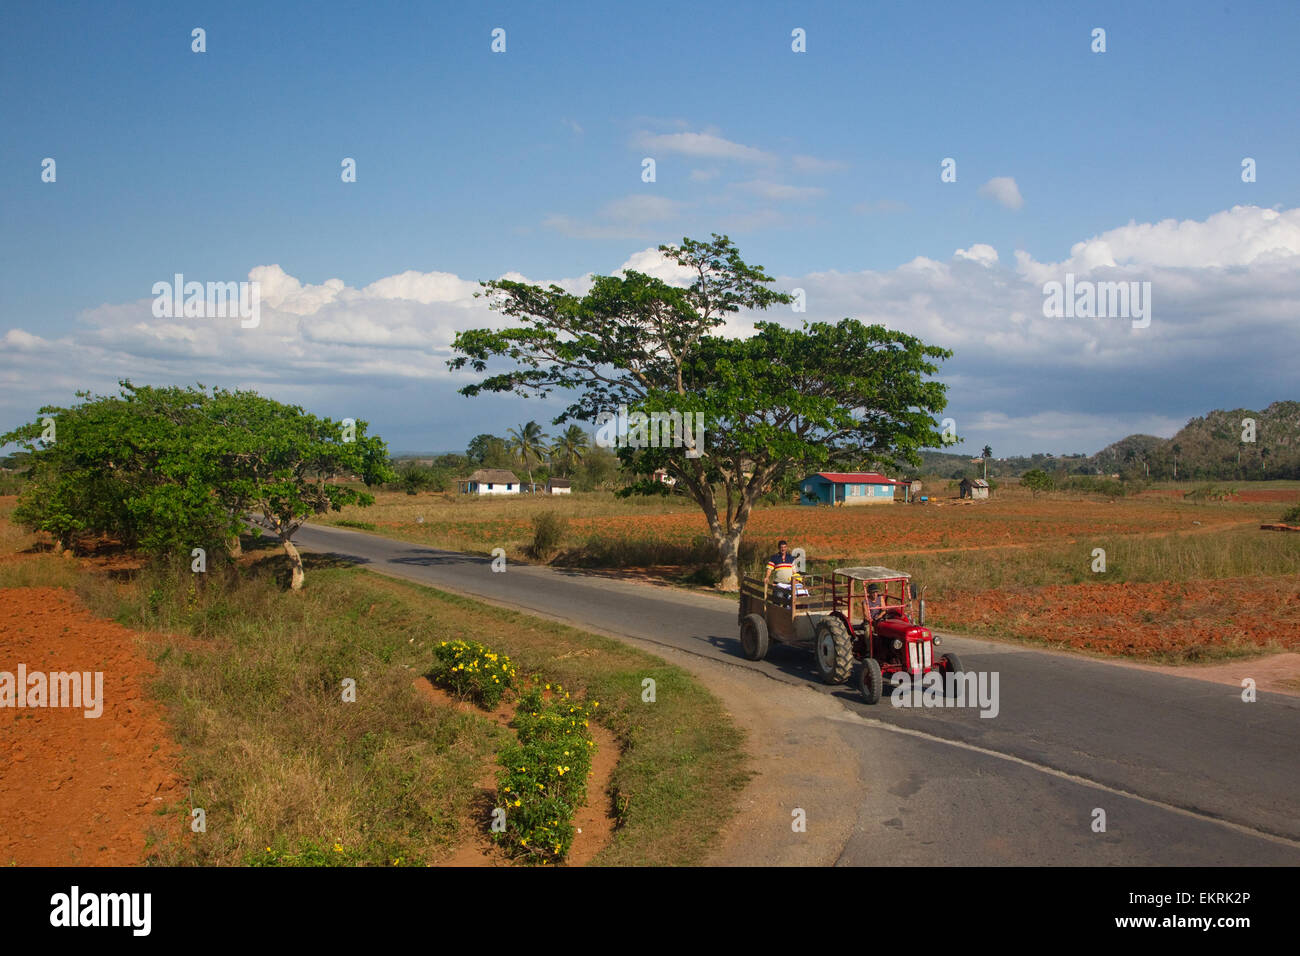 A farmer with a tractor in agricultural land in Vinales, Cuba with crops and tobacco plantations Stock Photo